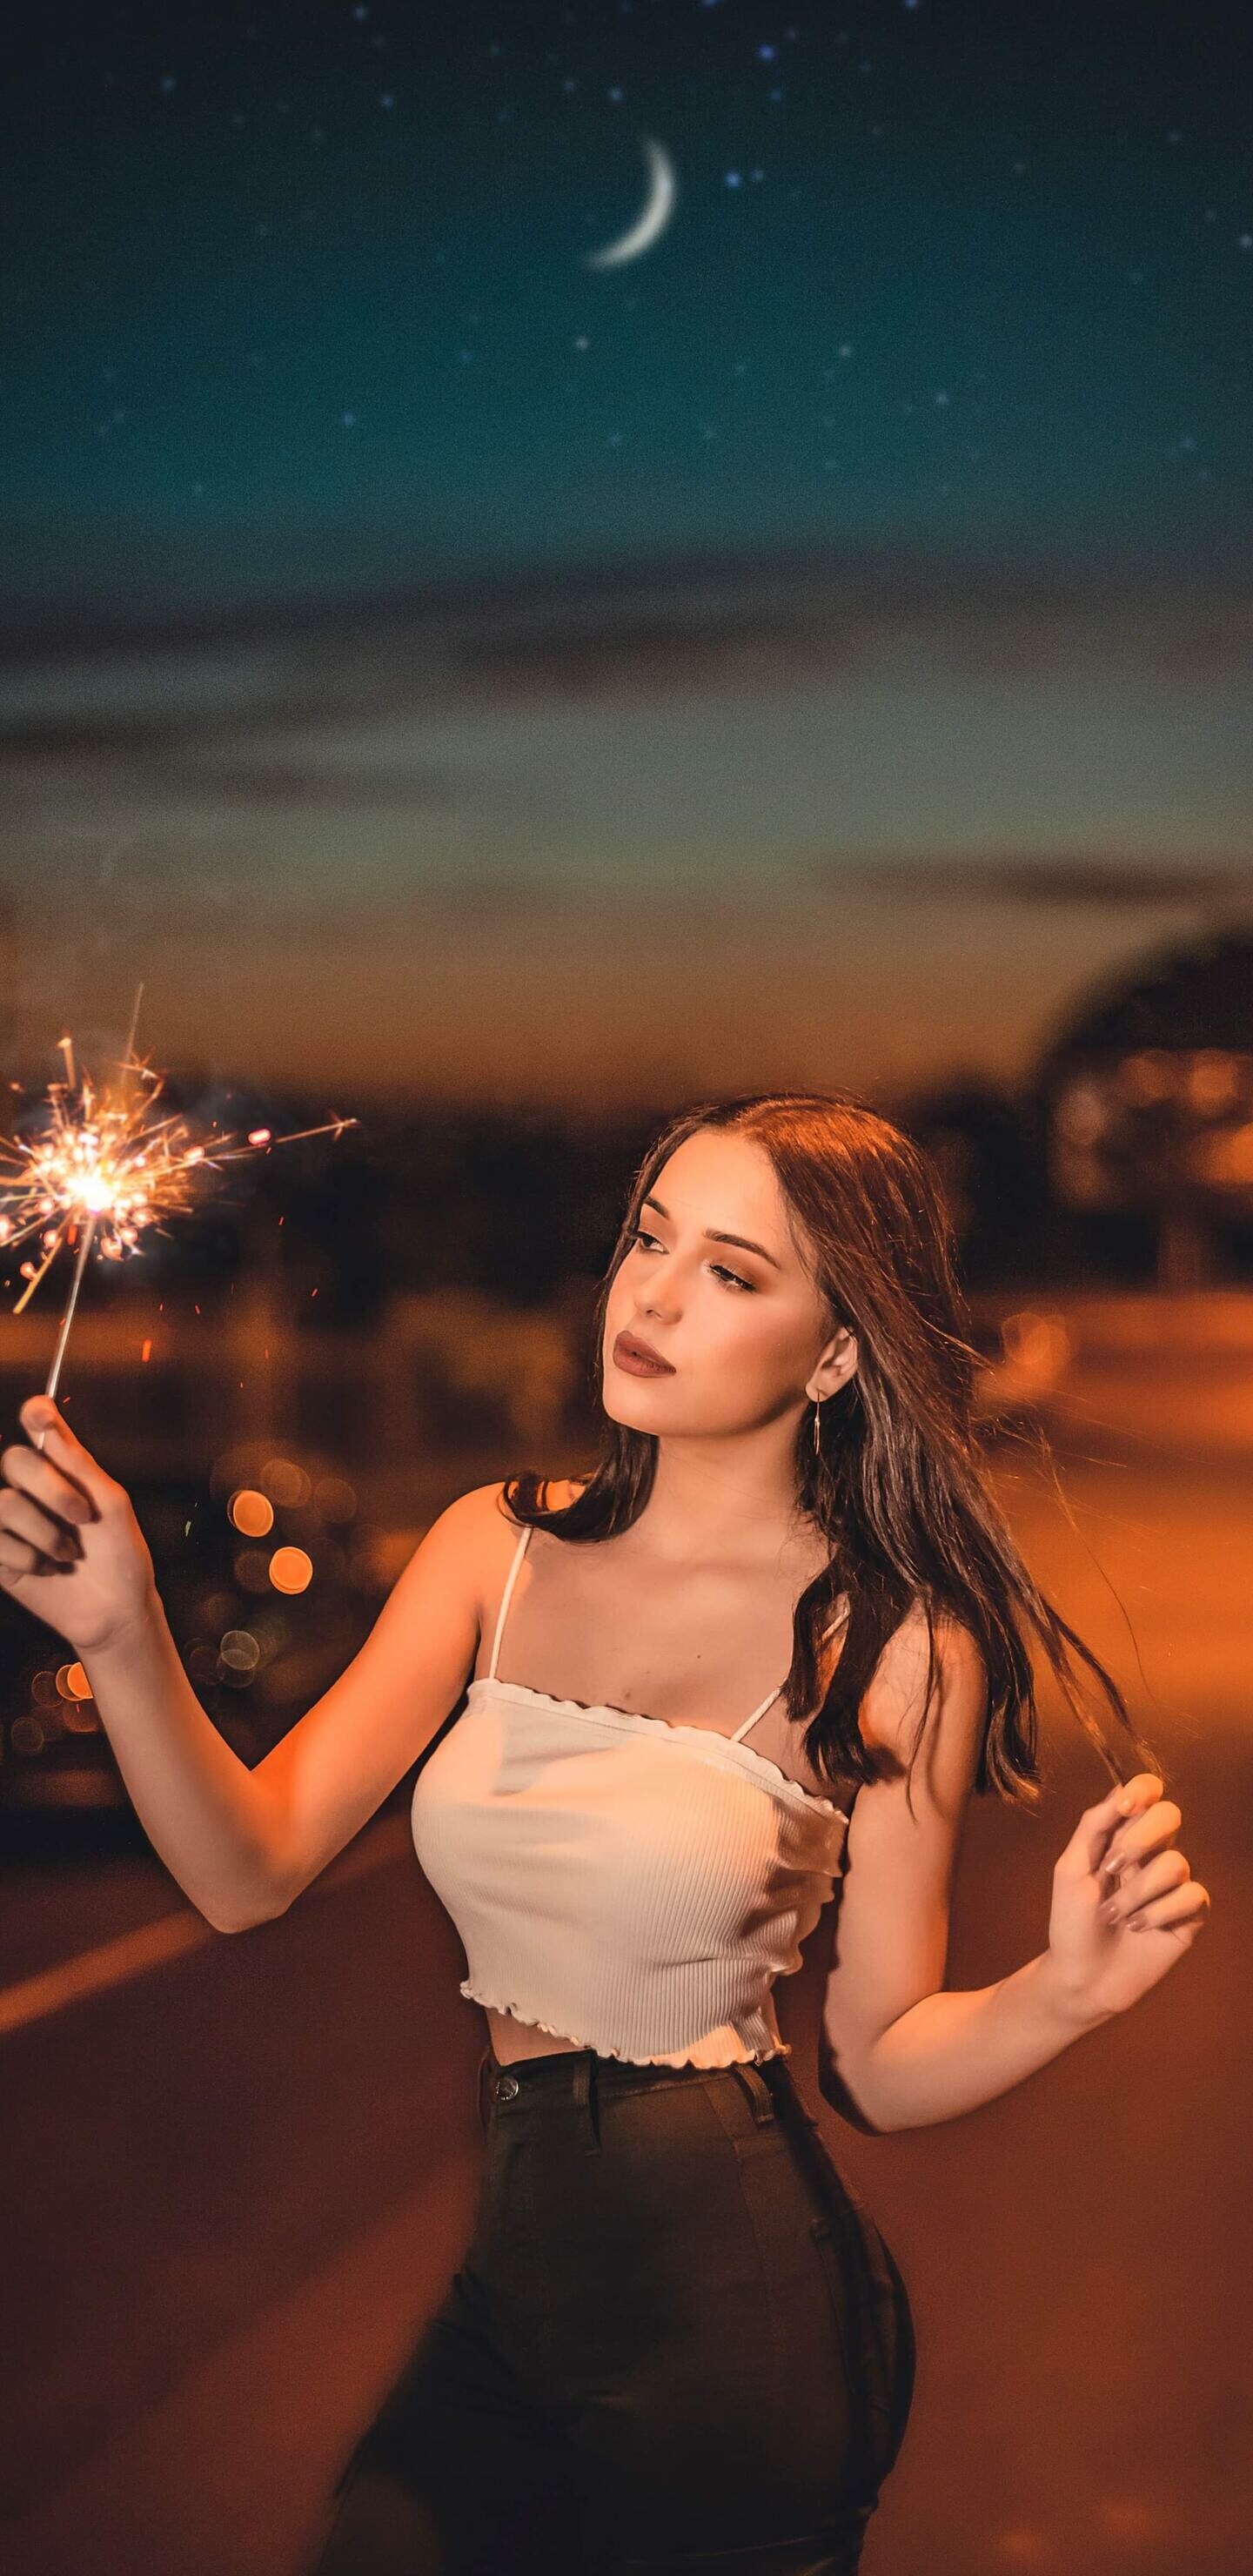 Sparkler, Girl with sparkle fireworks, Samsung Galaxy Note, S9, 1440x2960 HD Phone